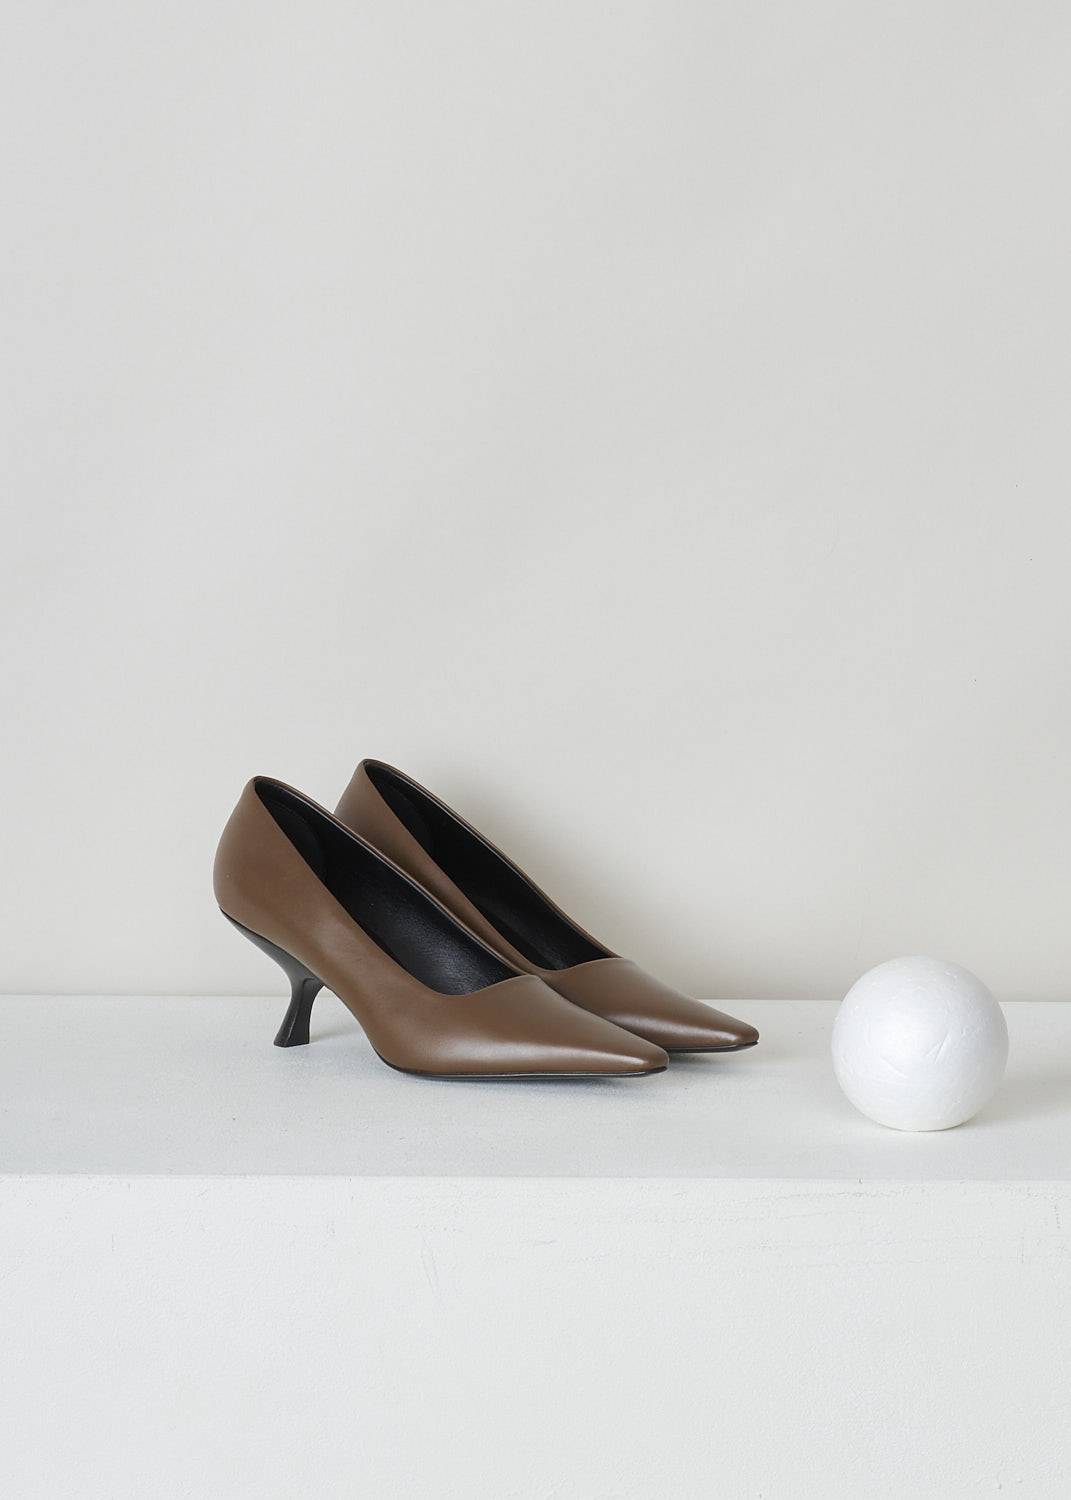 THE ROW, BROWN LEATHER KITTEN PUMPS, F1279_L52_CPR_KITTEN_PUMP_CIPRIA, Brown, Front, The brown slip-on kitten pumps have a squared pointed toe and a curved heel.  

